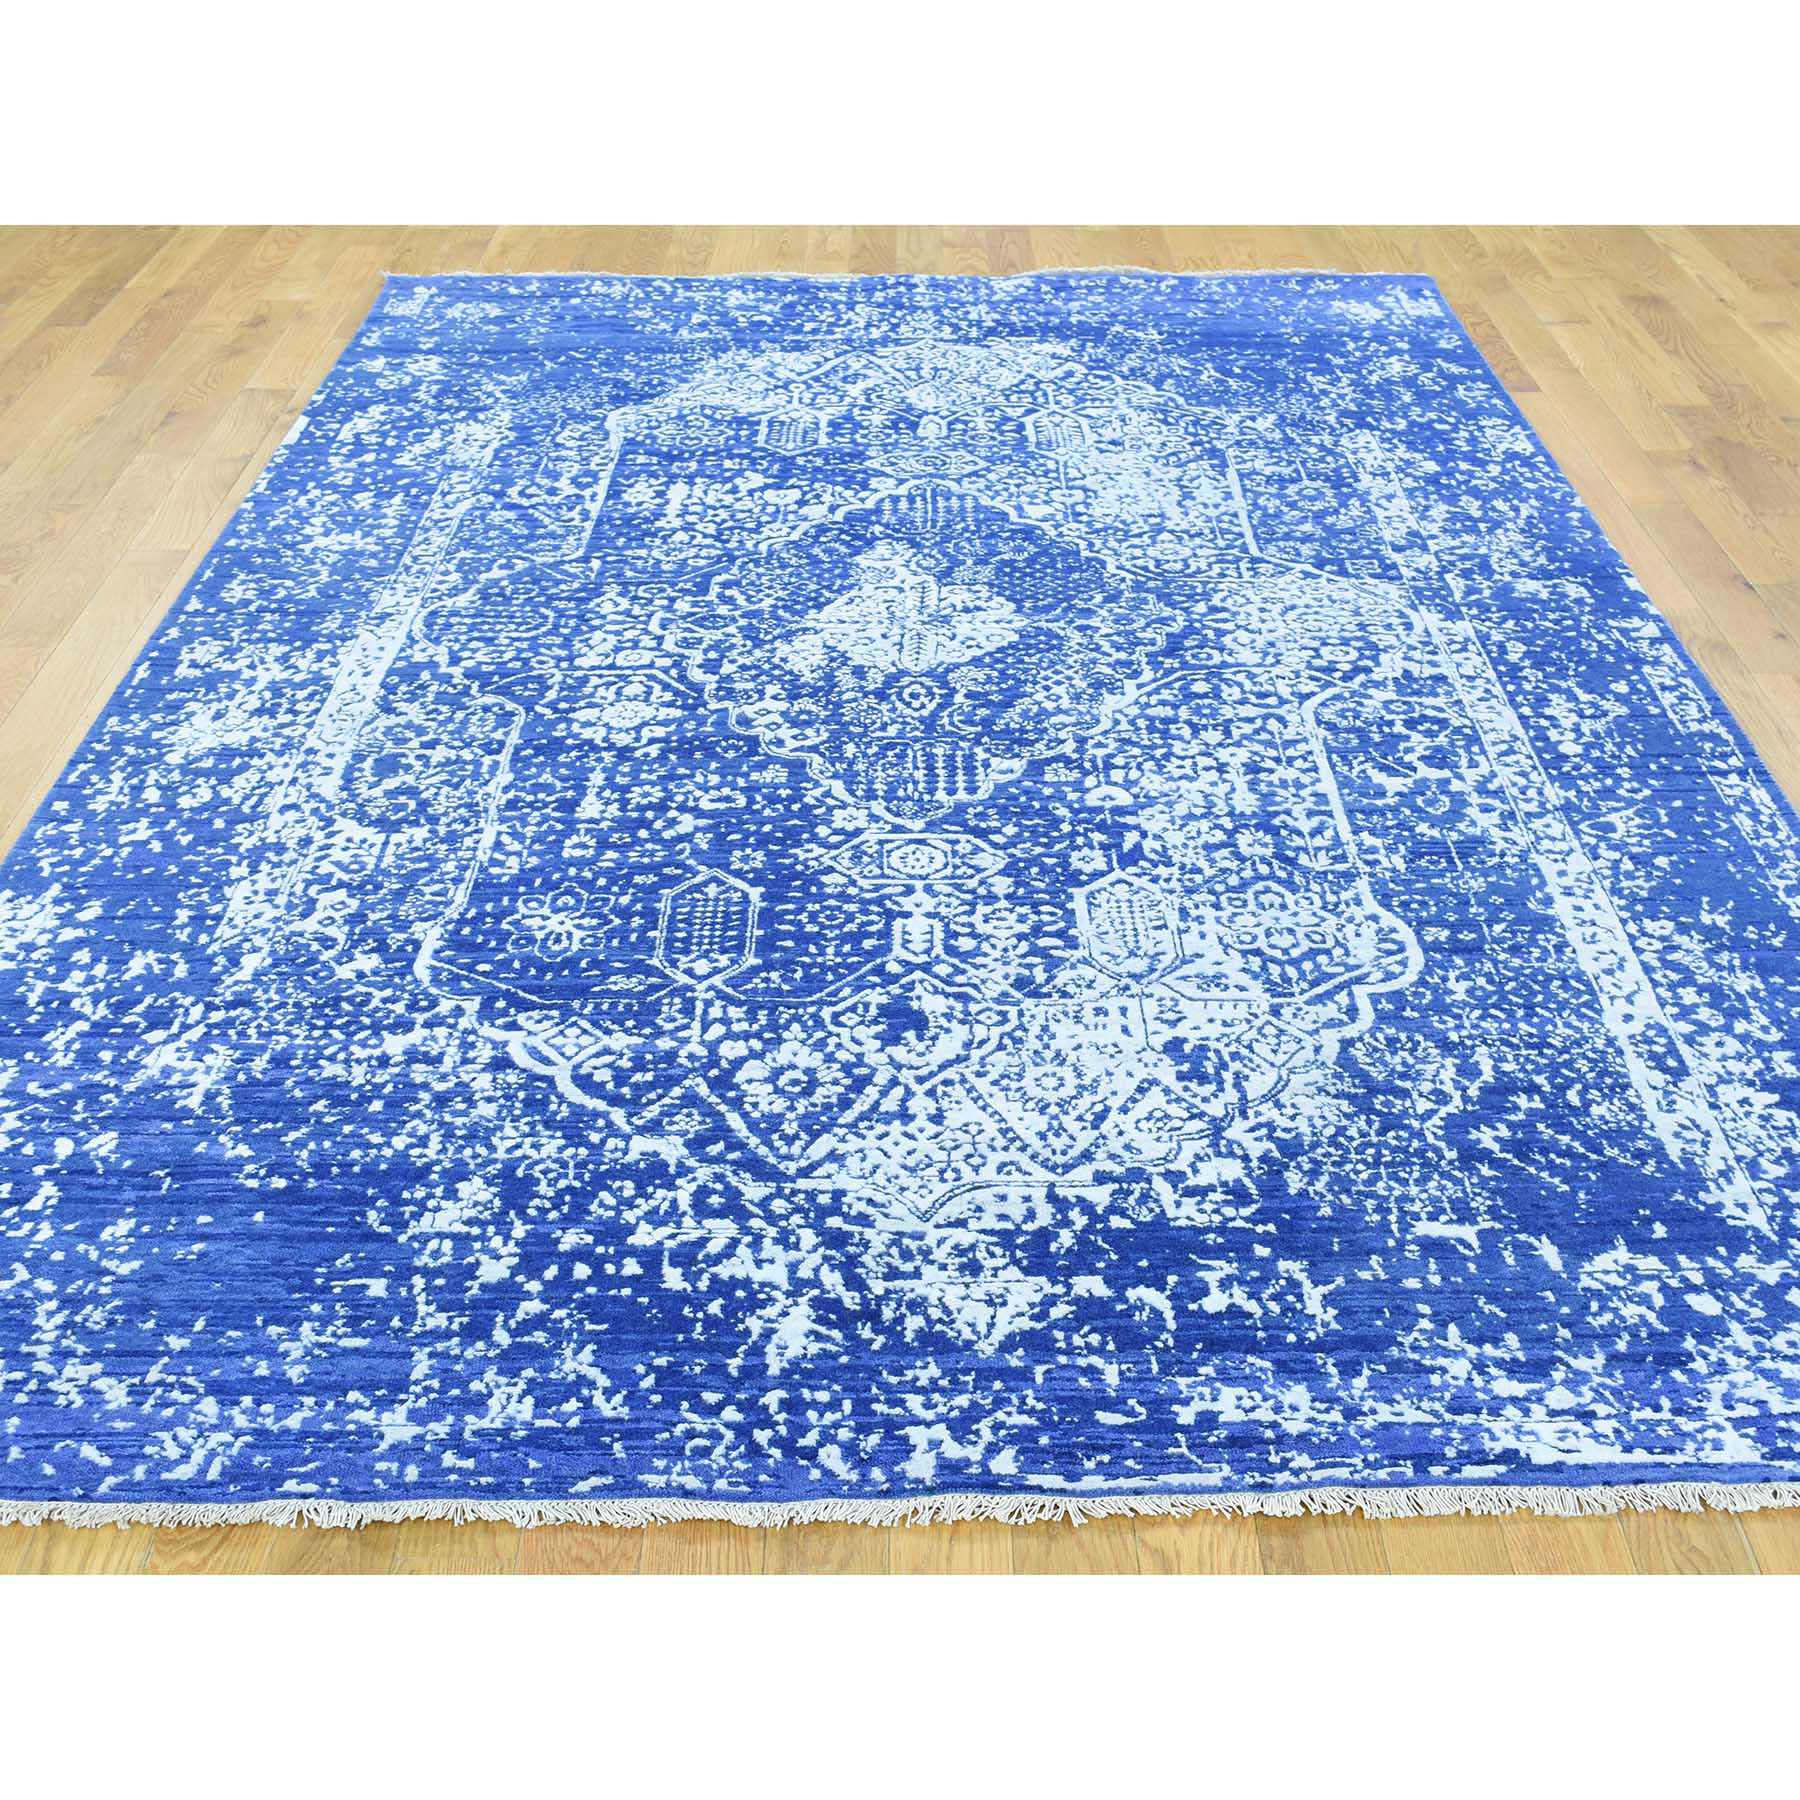 6-x8-9  Wool and Silk Hand-Knotted Broken Persian Design Oriental Rug 